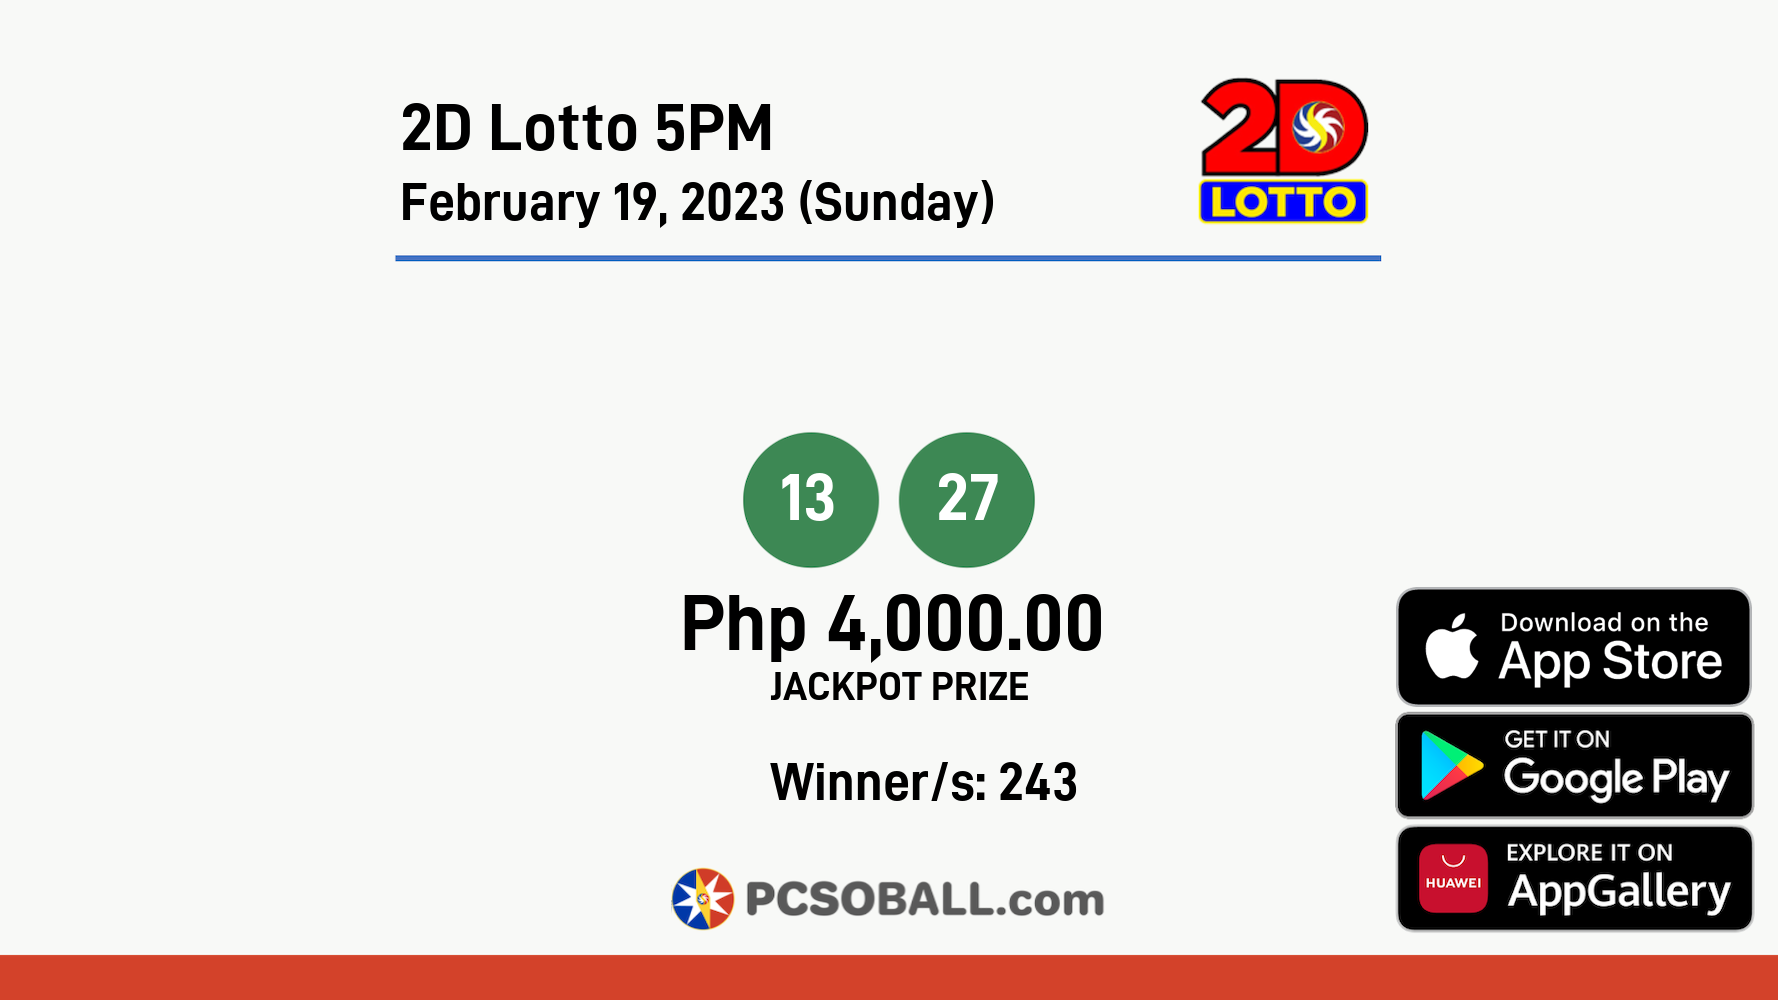 2D Lotto 5PM February 19, 2023 (Sunday) Result